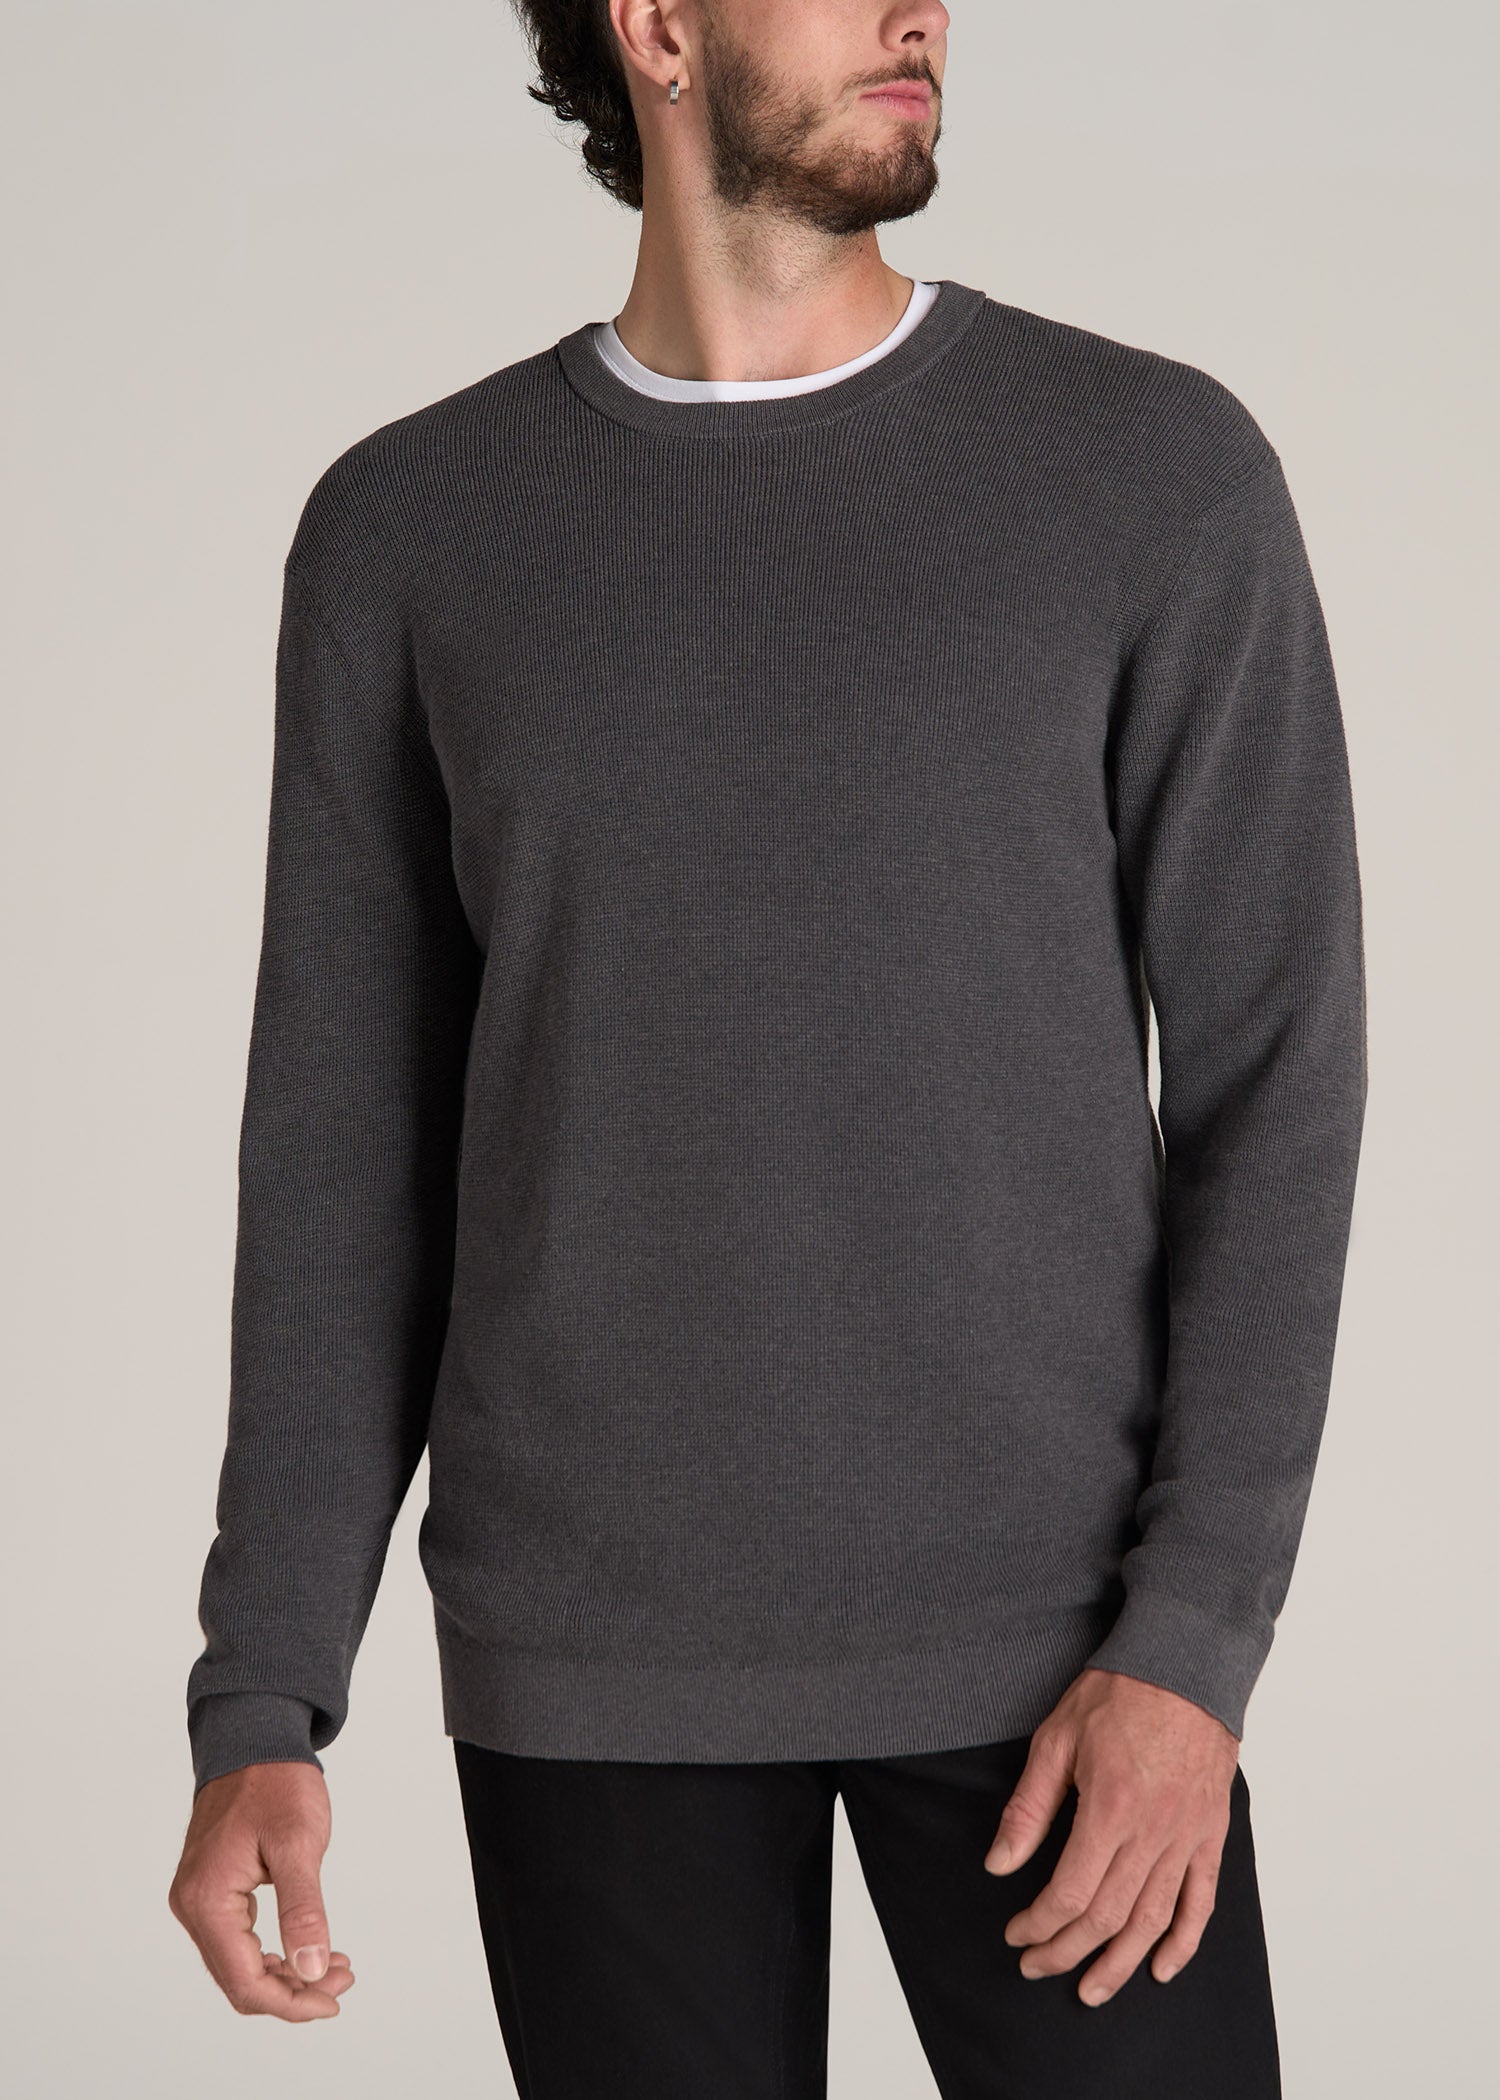 American-Tall-Men-Waffle-Knit-Sweater-Charcoal-Mix-front